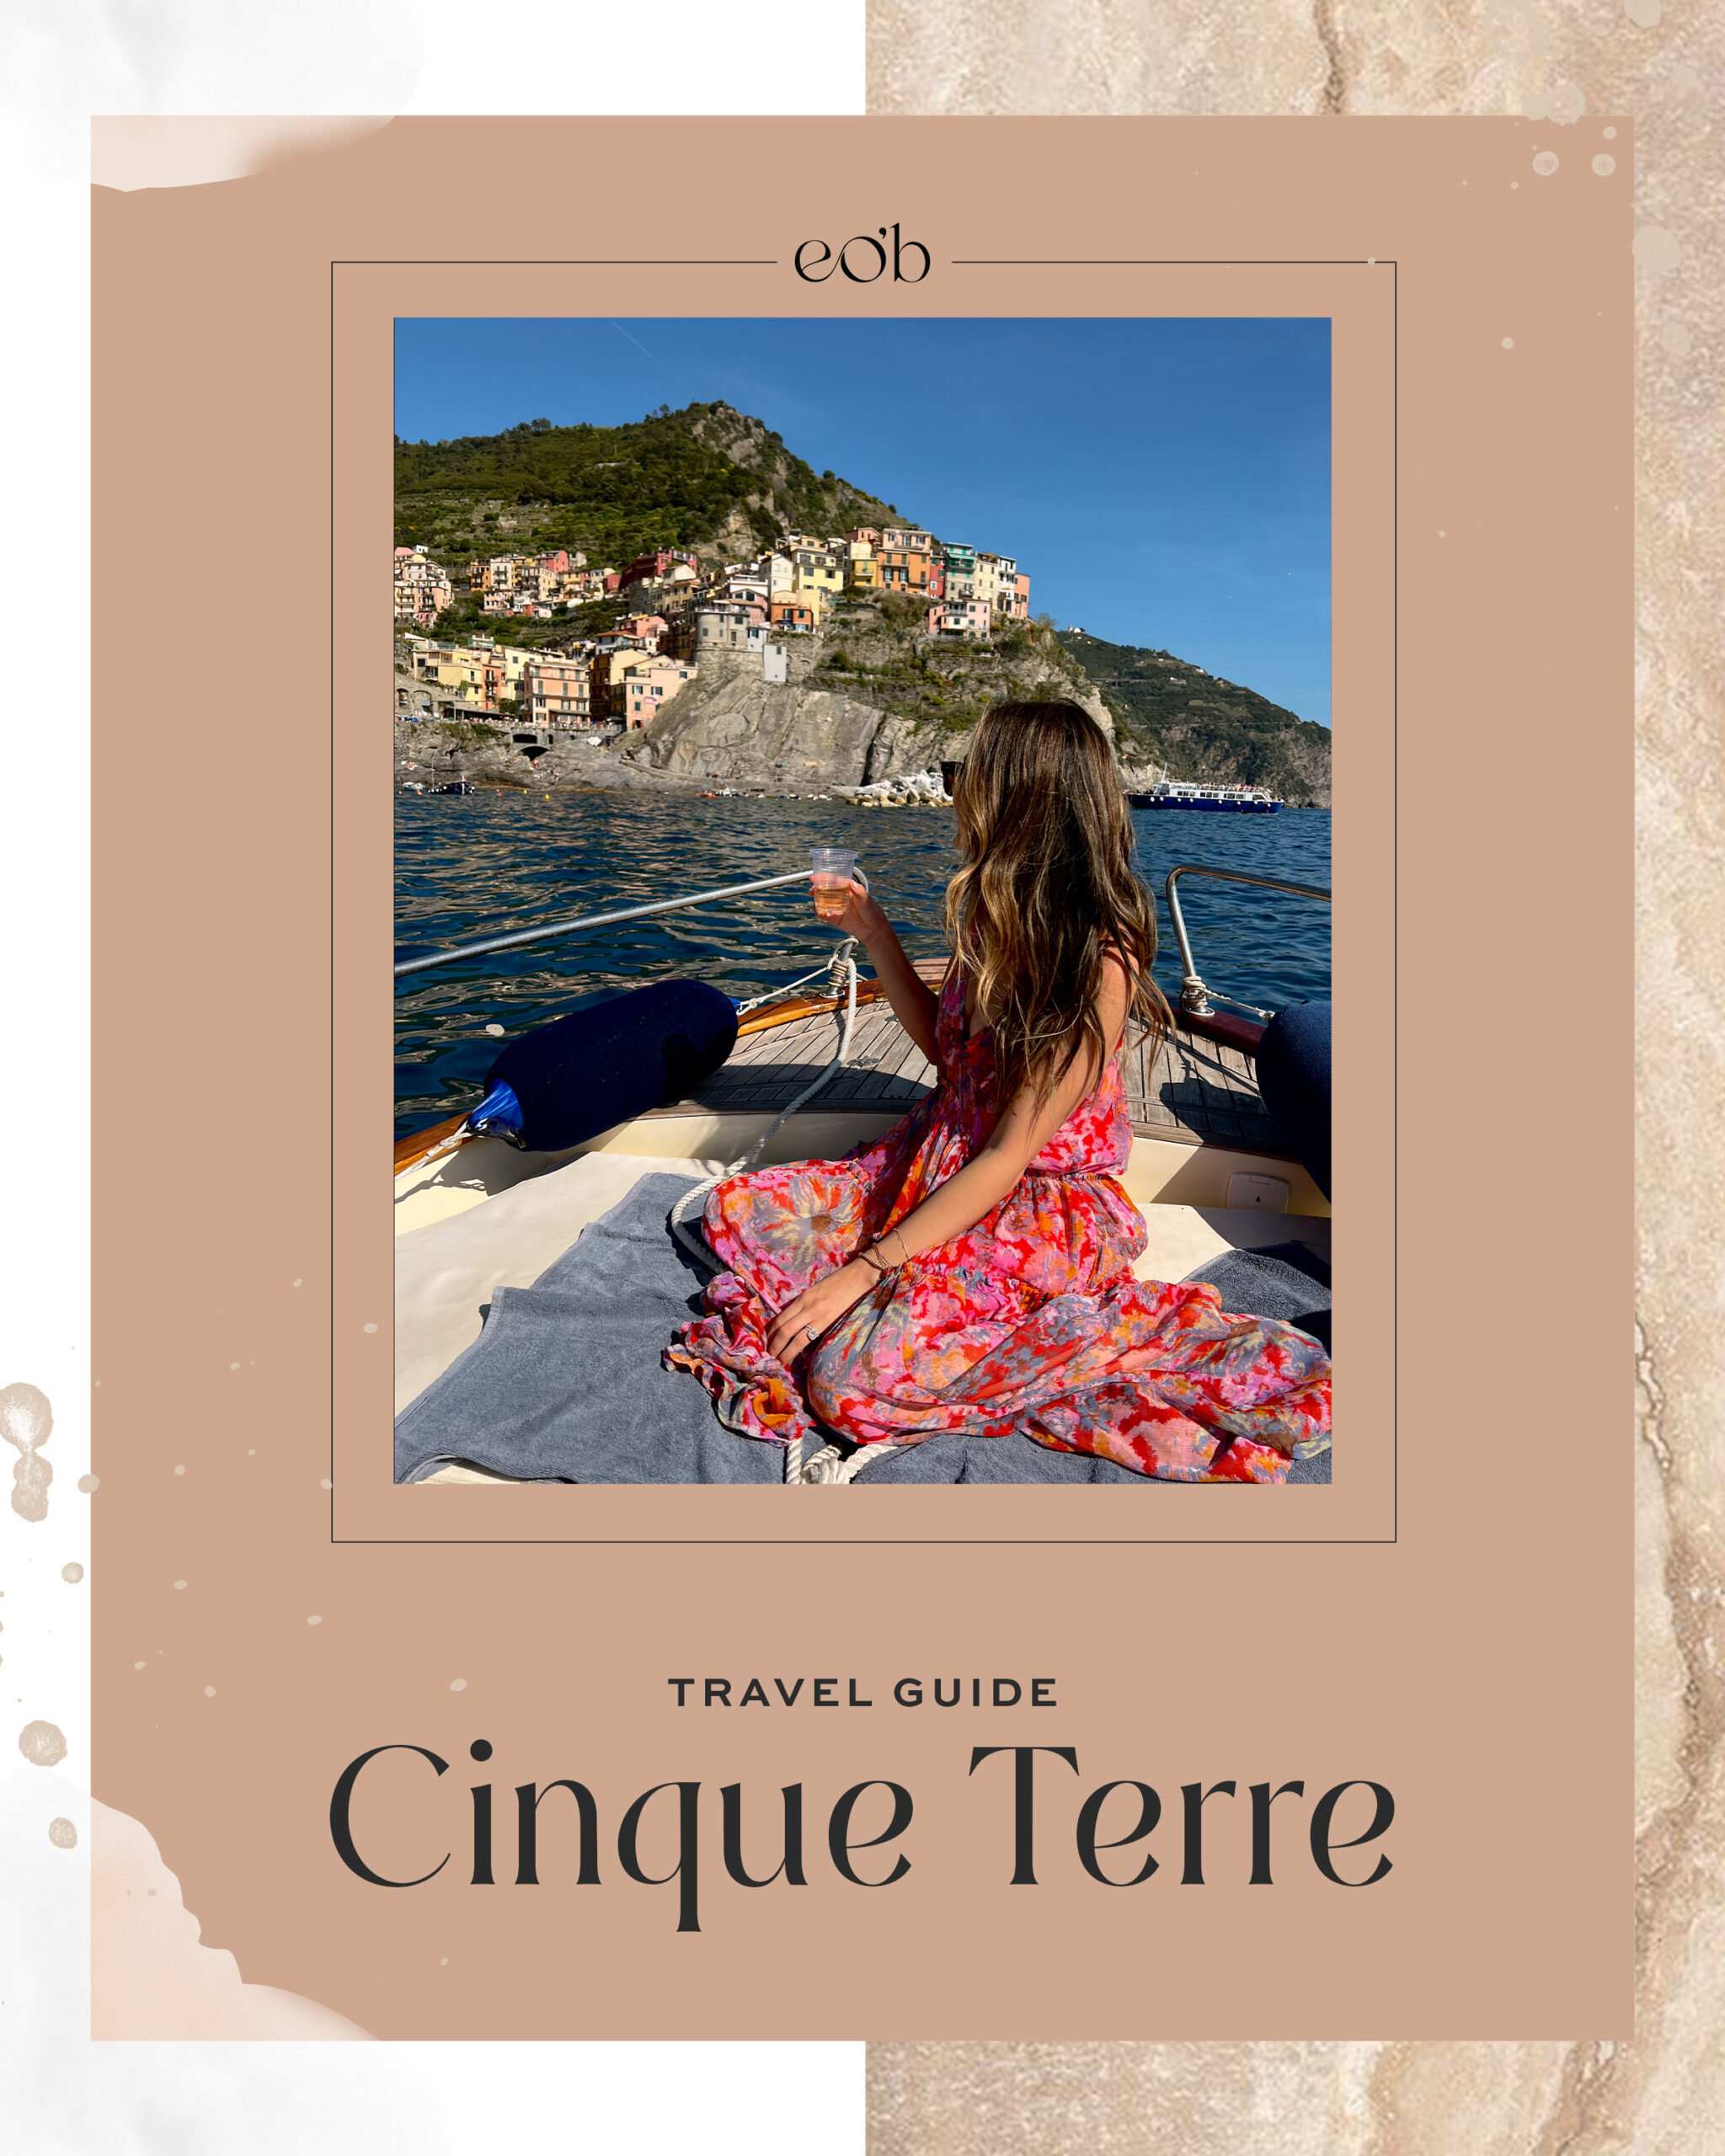 cinque terre italy travel guide for beach views on boat in vernazza